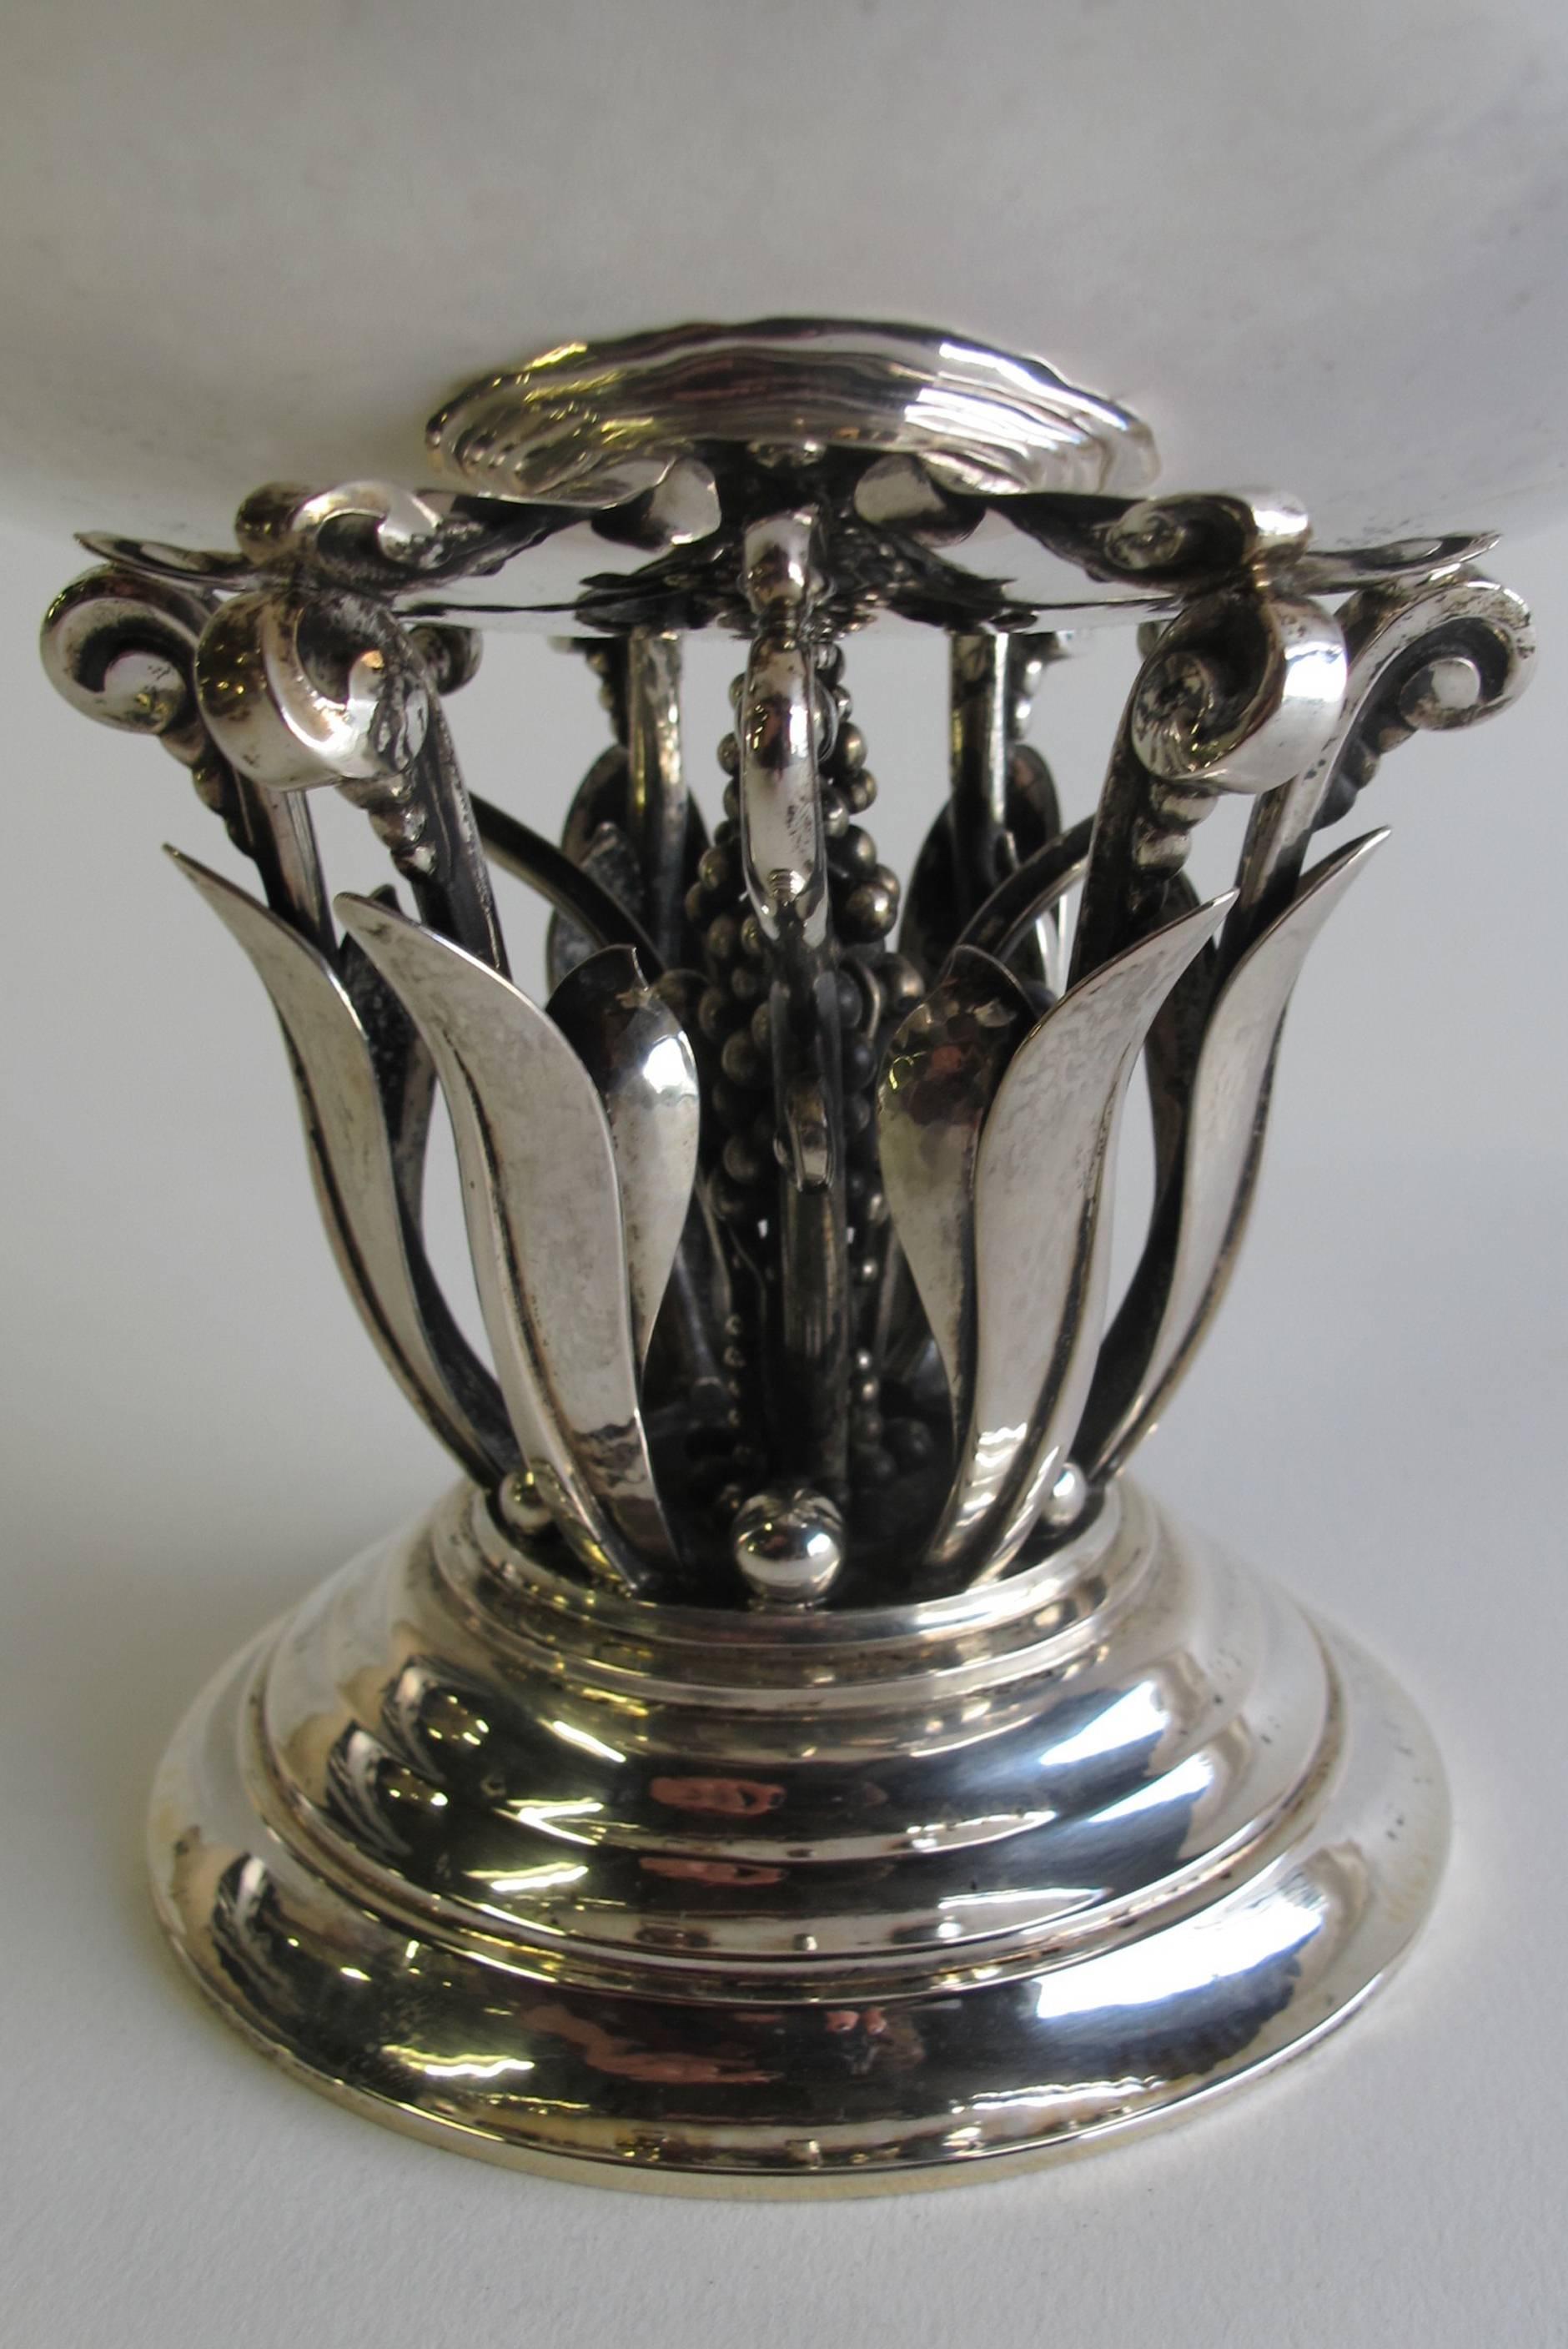 Large hammered silver centrepiece designed by Johan Rohde for Georg Jensen, circa 1916. The bowl rests on an openwork stem with leaves, clusters and beads and a circular foot. The number of this design is 196. The piece is executed between